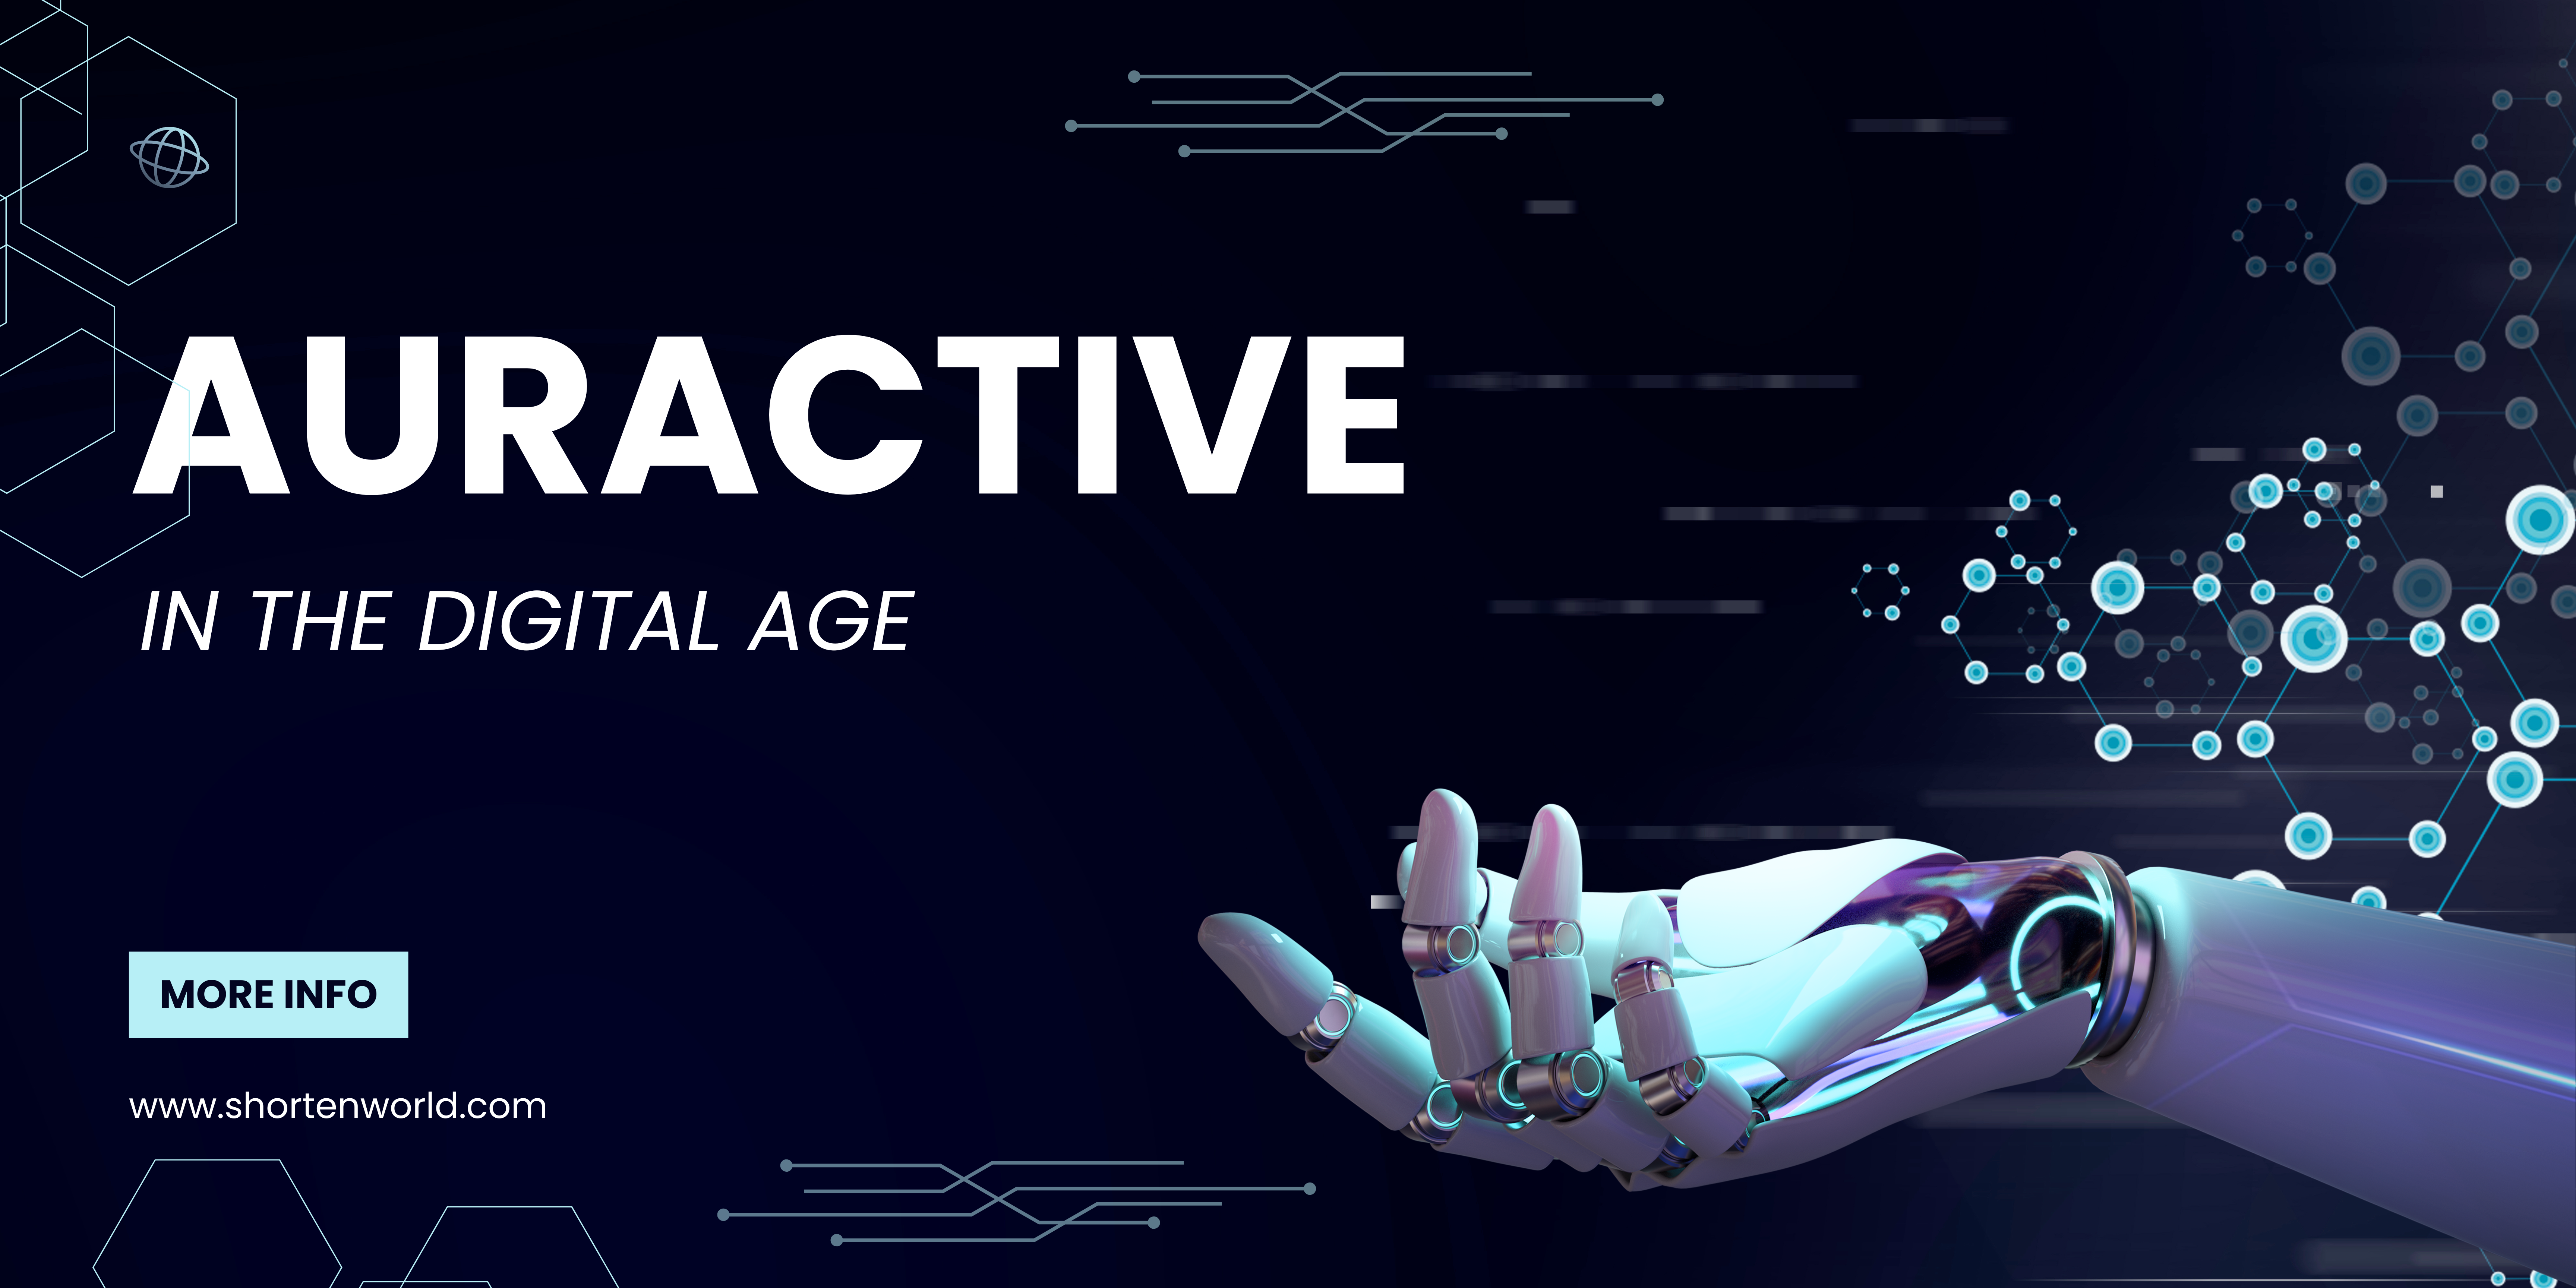 Auractive: What is Auractive in the Digital Age